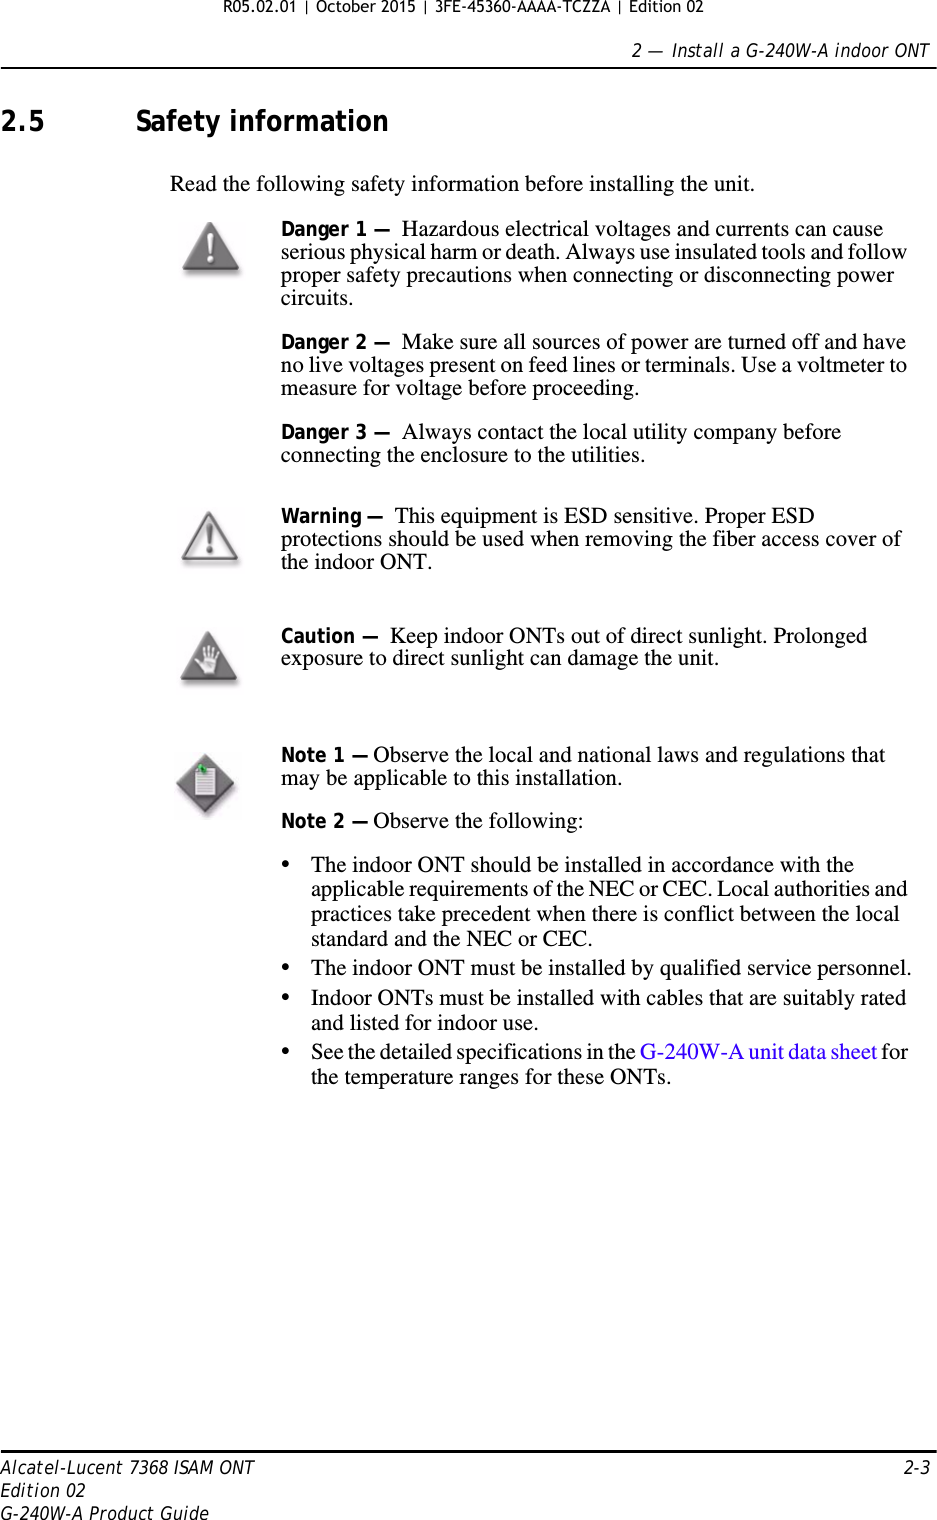 2 —  Install a G-240W-A indoor ONTAlcatel-Lucent 7368 ISAM ONT 2-3Edition 02G-240W-A Product Guide2.5 Safety informationRead the following safety information before installing the unit. Danger 1 —  Hazardous electrical voltages and currents can cause serious physical harm or death. Always use insulated tools and follow proper safety precautions when connecting or disconnecting power circuits. Danger 2 —  Make sure all sources of power are turned off and have no live voltages present on feed lines or terminals. Use a voltmeter to measure for voltage before proceeding.Danger 3 —  Always contact the local utility company before connecting the enclosure to the utilities.Warning —  This equipment is ESD sensitive. Proper ESD protections should be used when removing the fiber access cover of the indoor ONT.Caution —  Keep indoor ONTs out of direct sunlight. Prolonged exposure to direct sunlight can damage the unit.Note 1 — Observe the local and national laws and regulations that may be applicable to this installation.Note 2 — Observe the following:•The indoor ONT should be installed in accordance with the applicable requirements of the NEC or CEC. Local authorities and practices take precedent when there is conflict between the local standard and the NEC or CEC. •The indoor ONT must be installed by qualified service personnel.•Indoor ONTs must be installed with cables that are suitably rated and listed for indoor use.•See the detailed specifications in the G-240W-A unit data sheet for the temperature ranges for these ONTs.  R05.02.01 | October 2015 | 3FE-45360-AAAA-TCZZA | Edition 02 